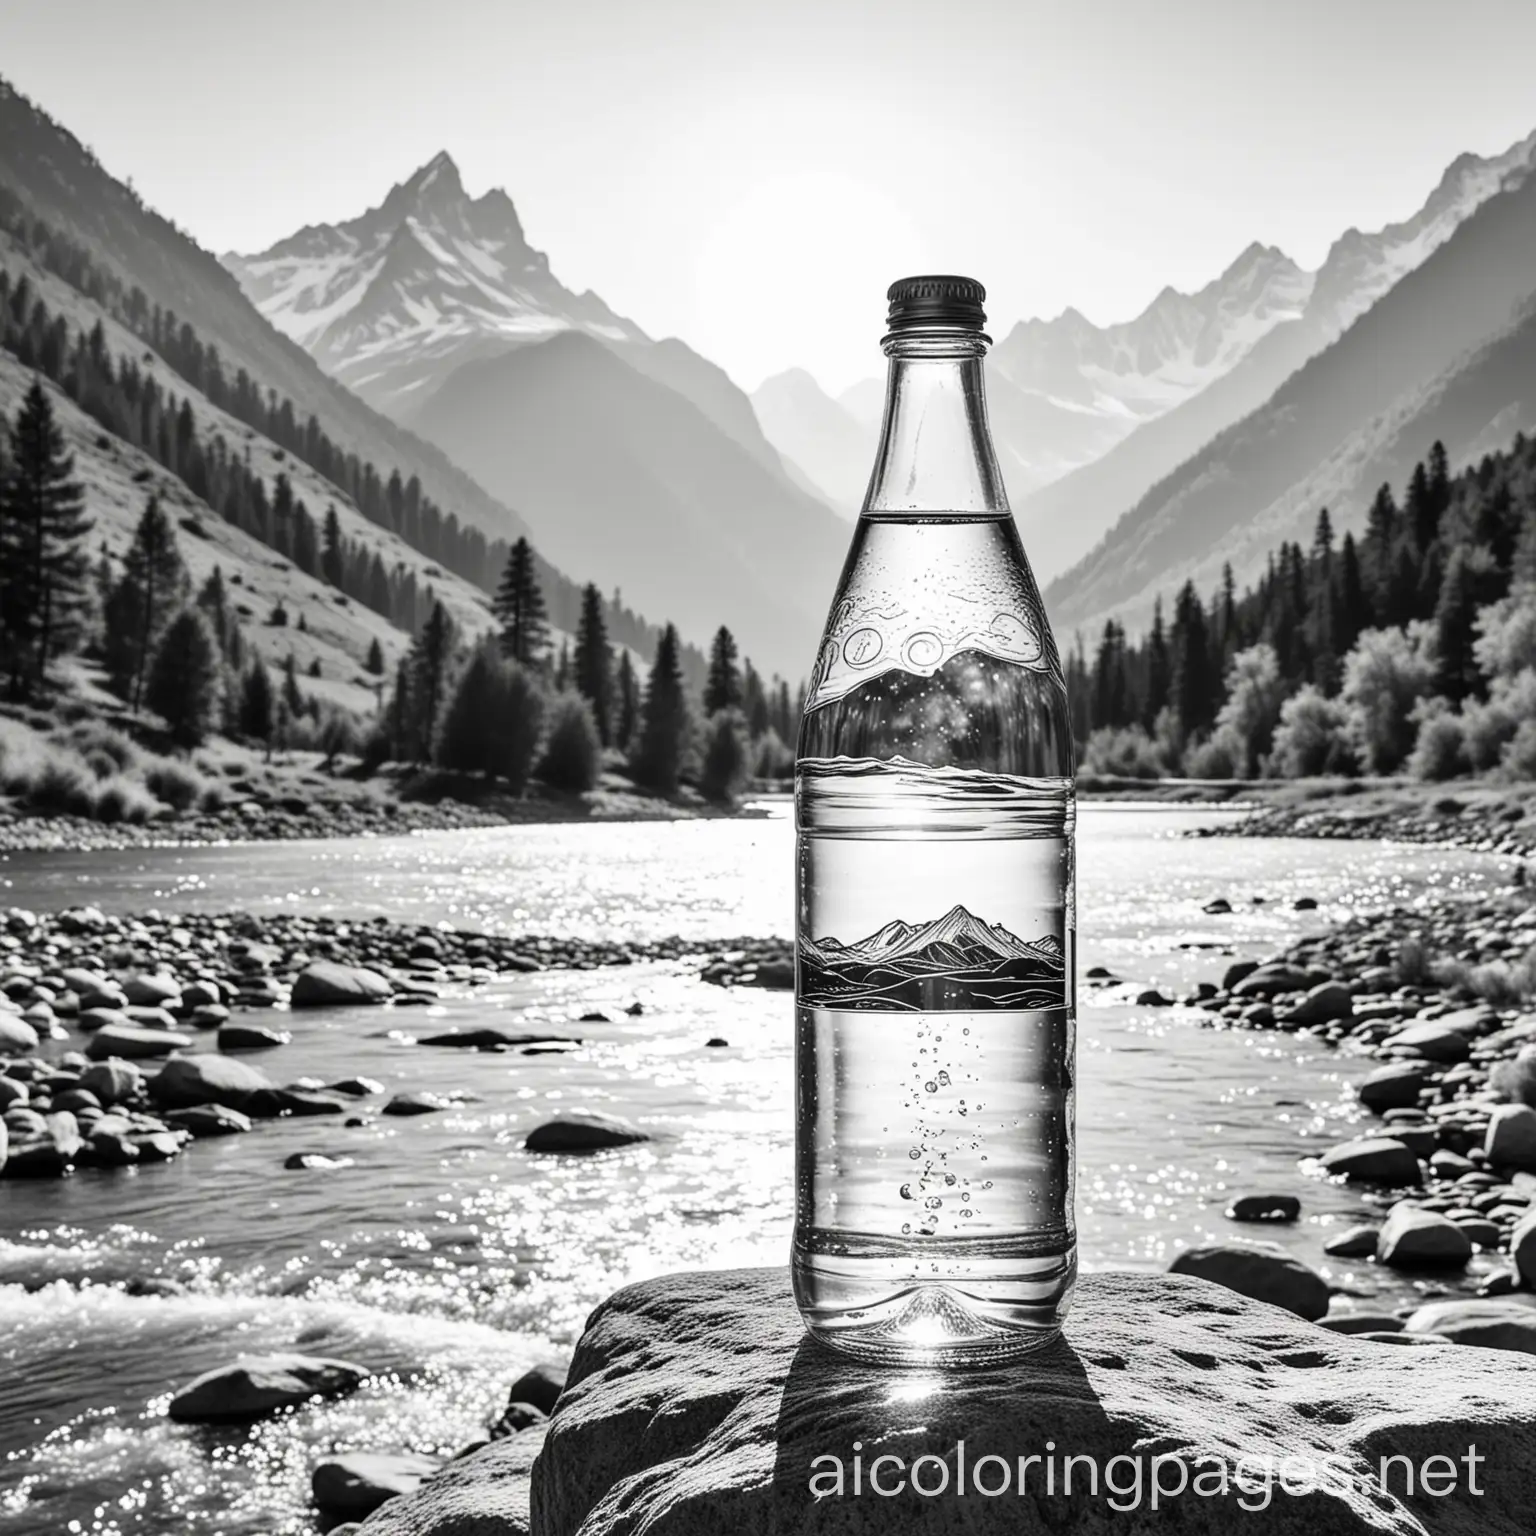  a bottle of mineral water, on the background of mountains, on the background of a river flowing, Coloring Page, black and white, line art, white background, Simplicity, Ample White Space. The background of the coloring page is plain white to make it easy for young children to color within the lines. The outlines of all the subjects are easy to distinguish, making it simple for kids to color without too much difficulty